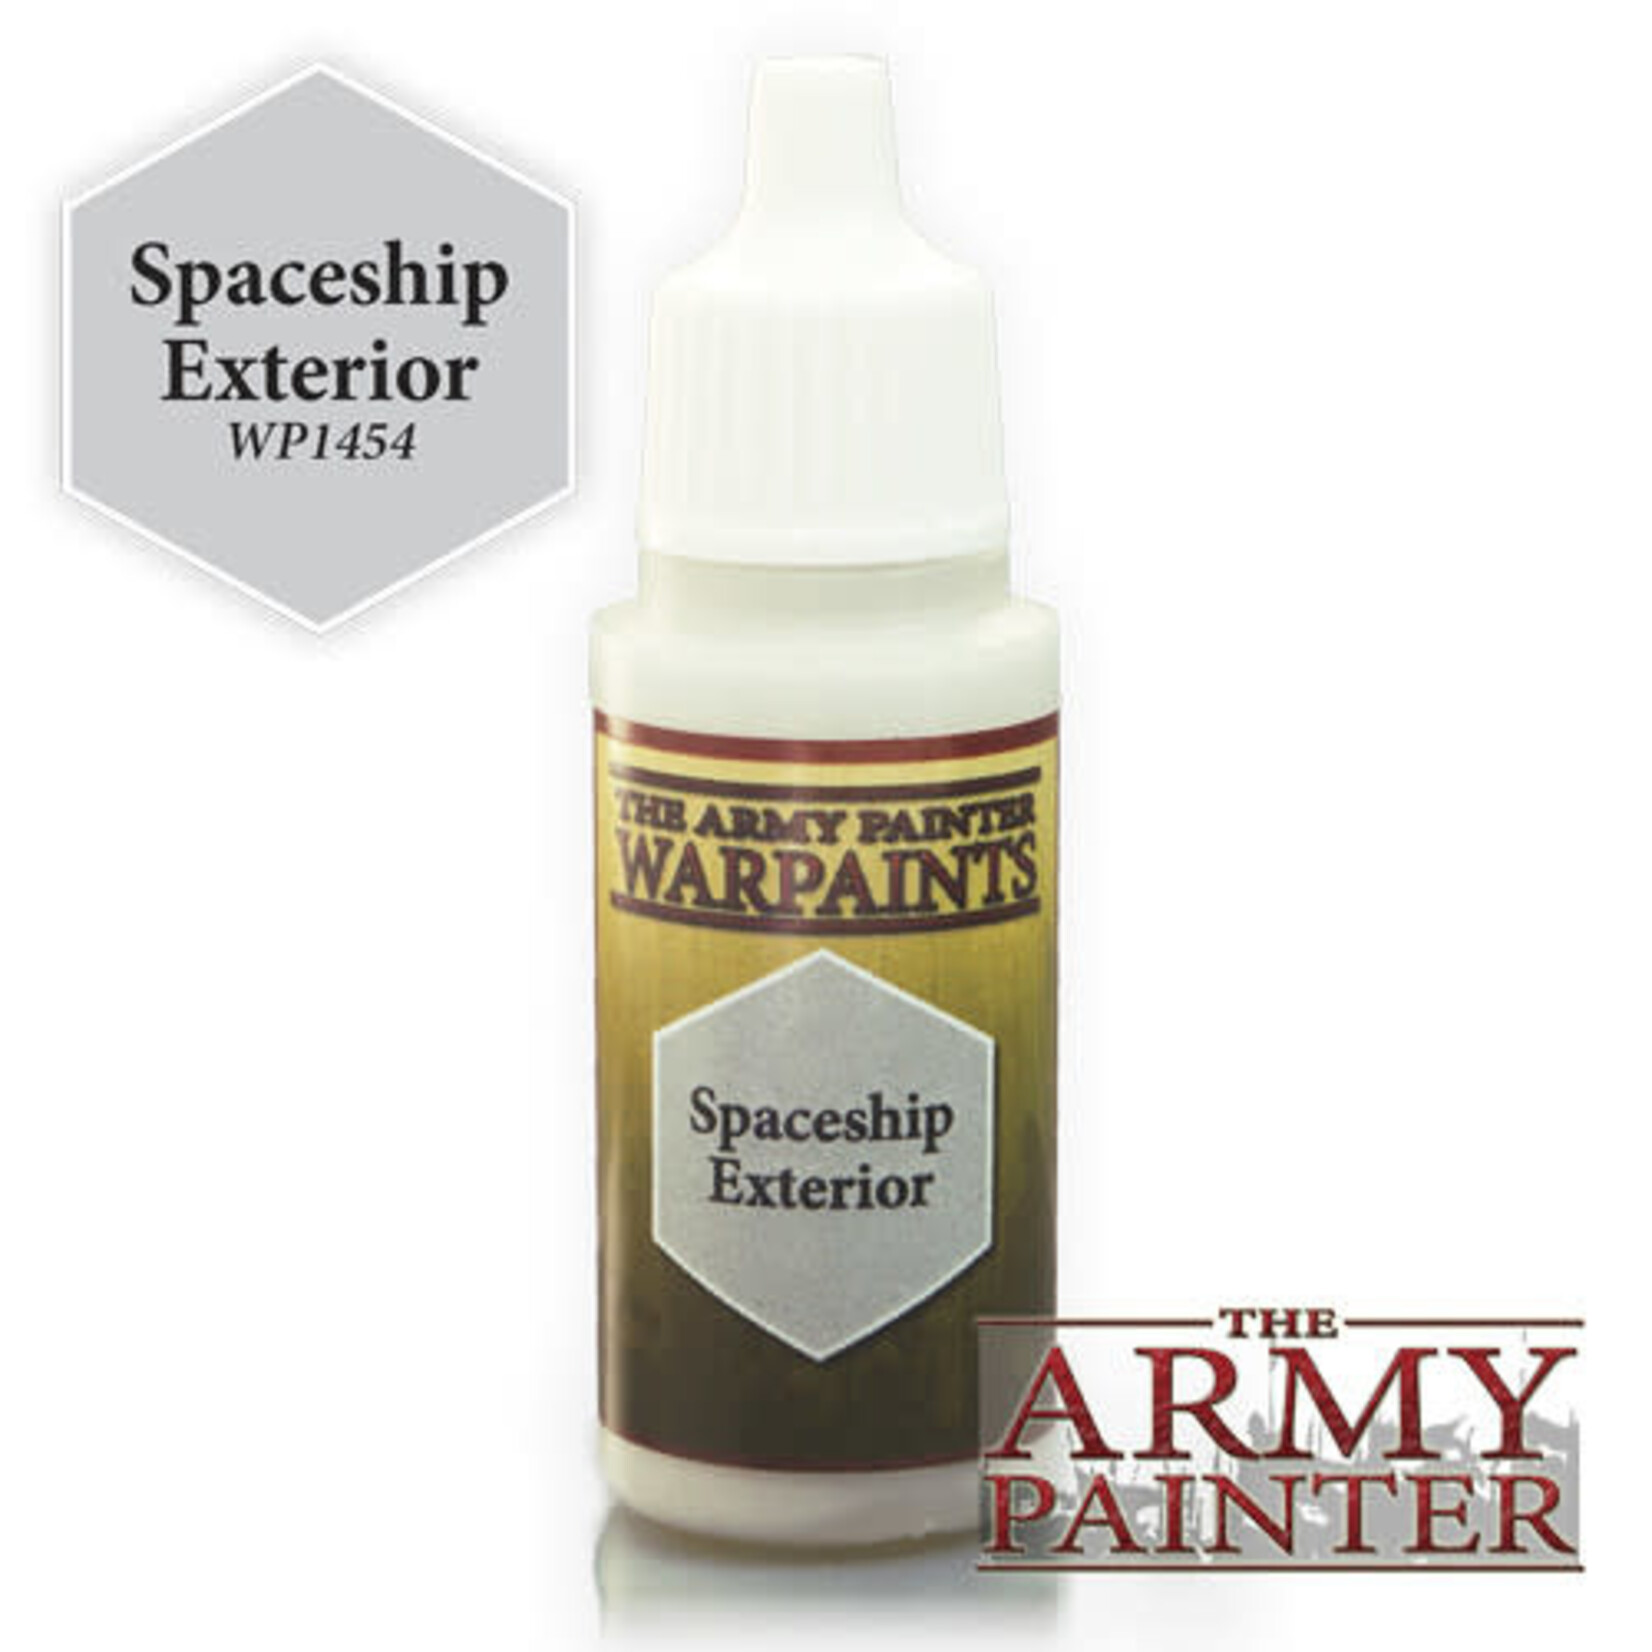 The Army Painter Warpaints: Spaceship Exterior 18ml